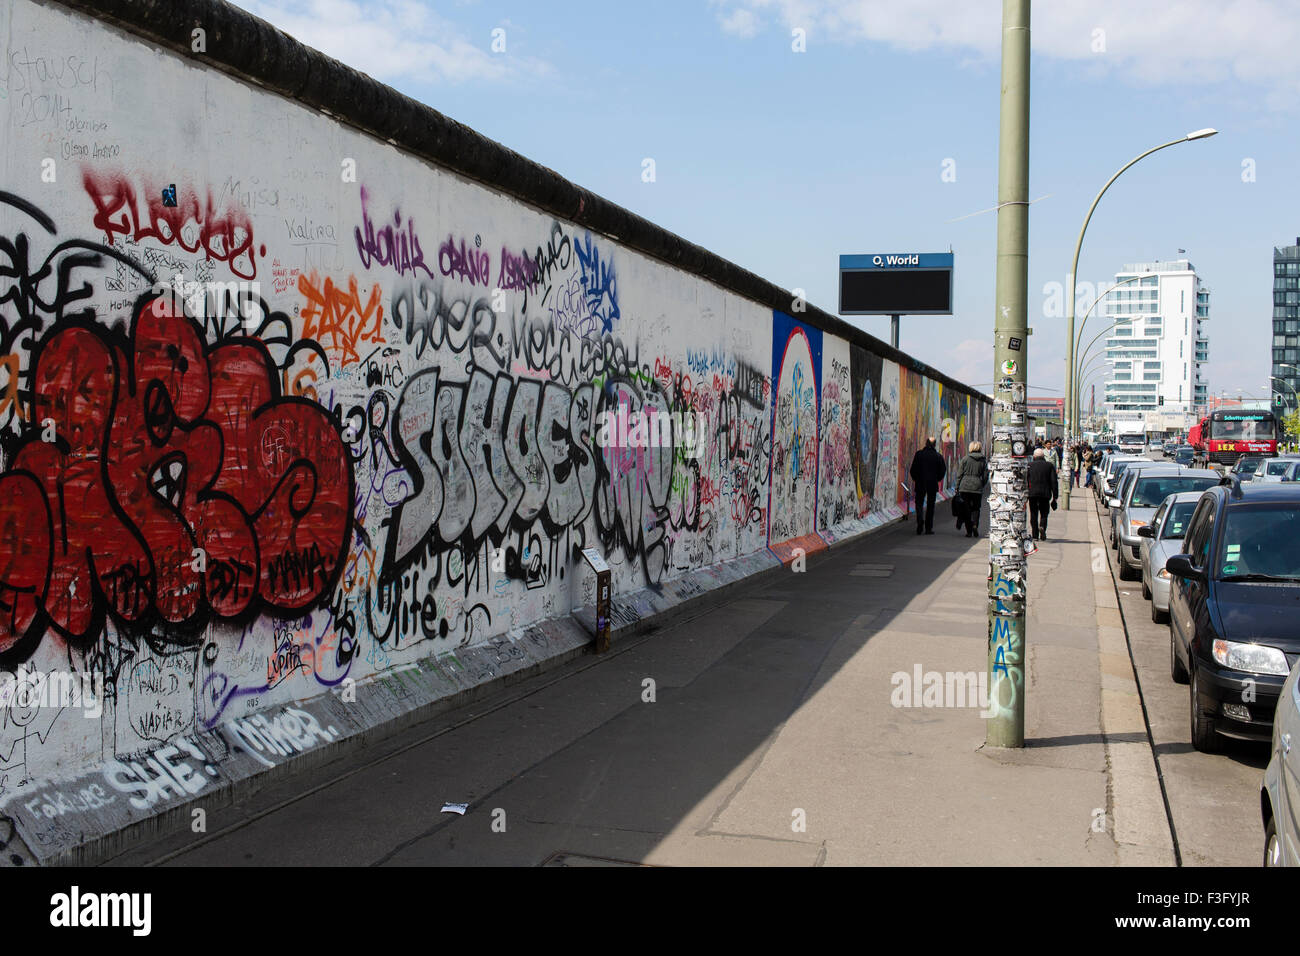 The largest open-air art gallery in the world, The East Side Gallery along the Berlin Wall, Germany. Stock Photo